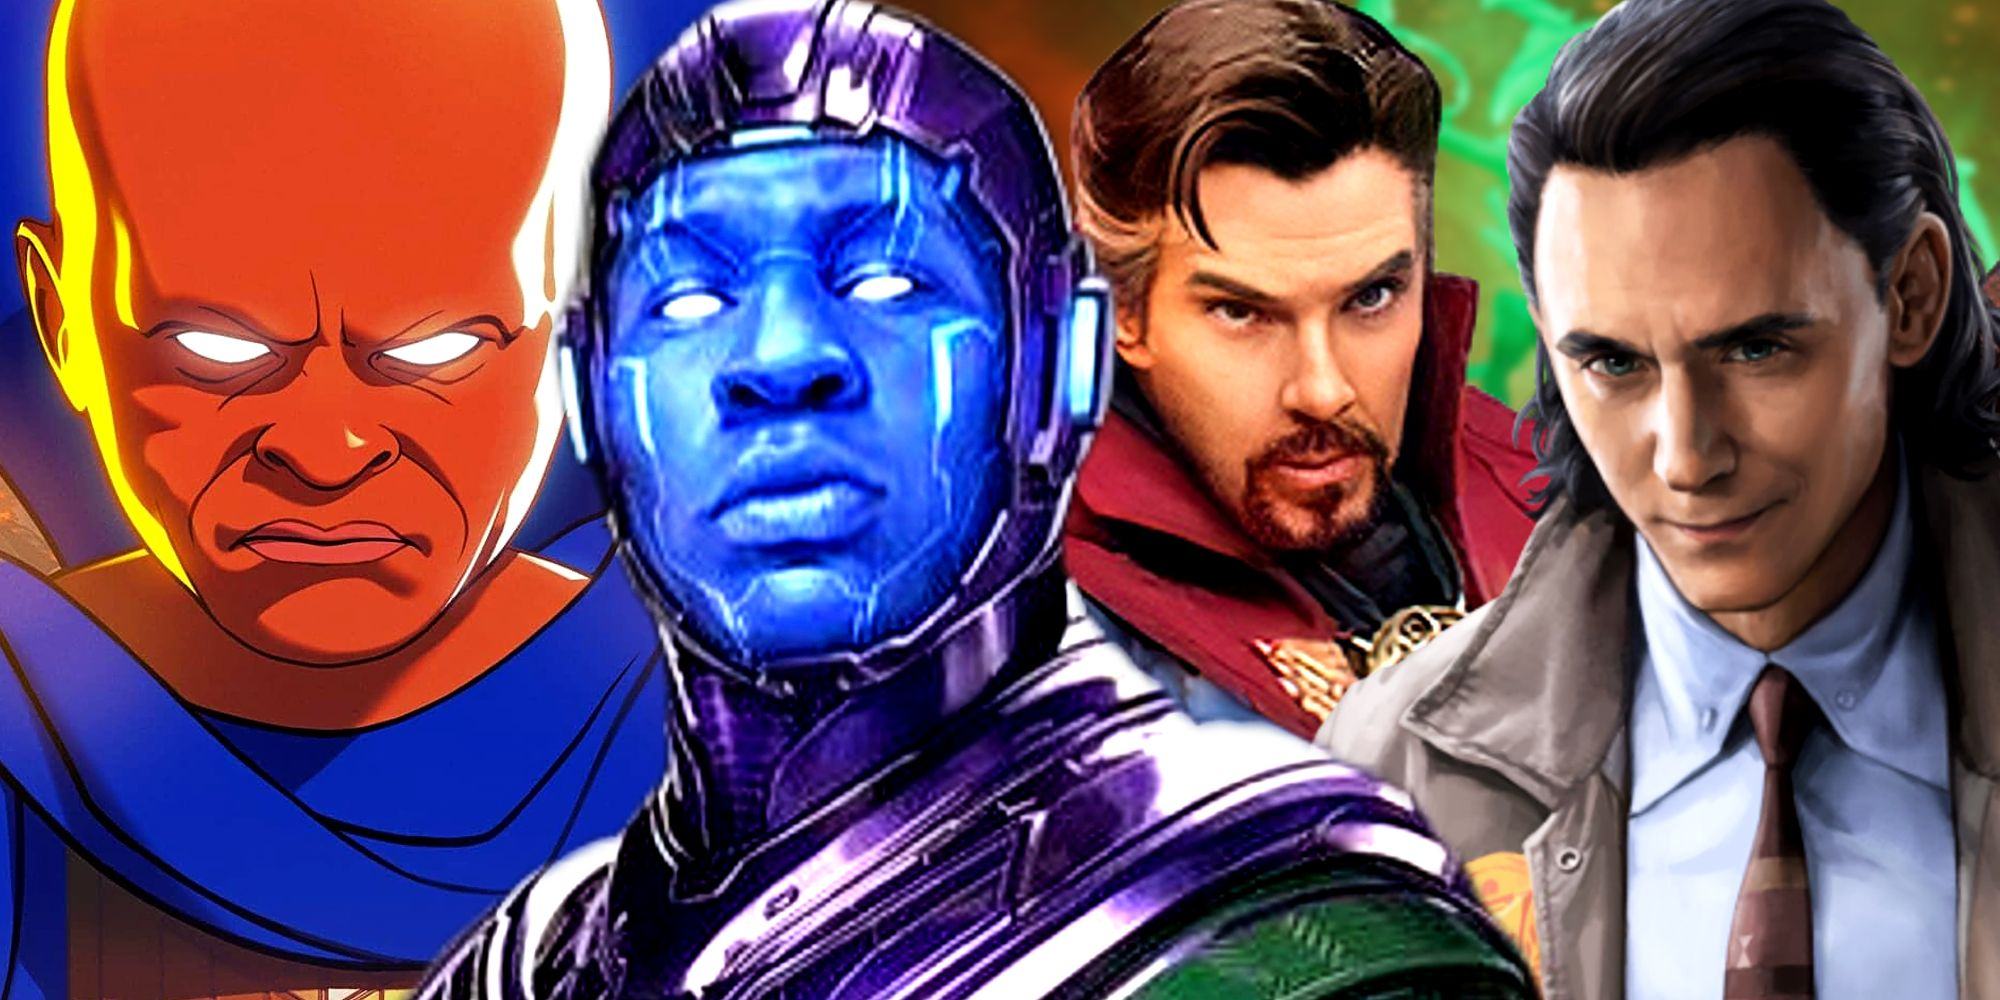 Kang the Conqueror, Doctor Strange, Loki and Overwatch in the MCU